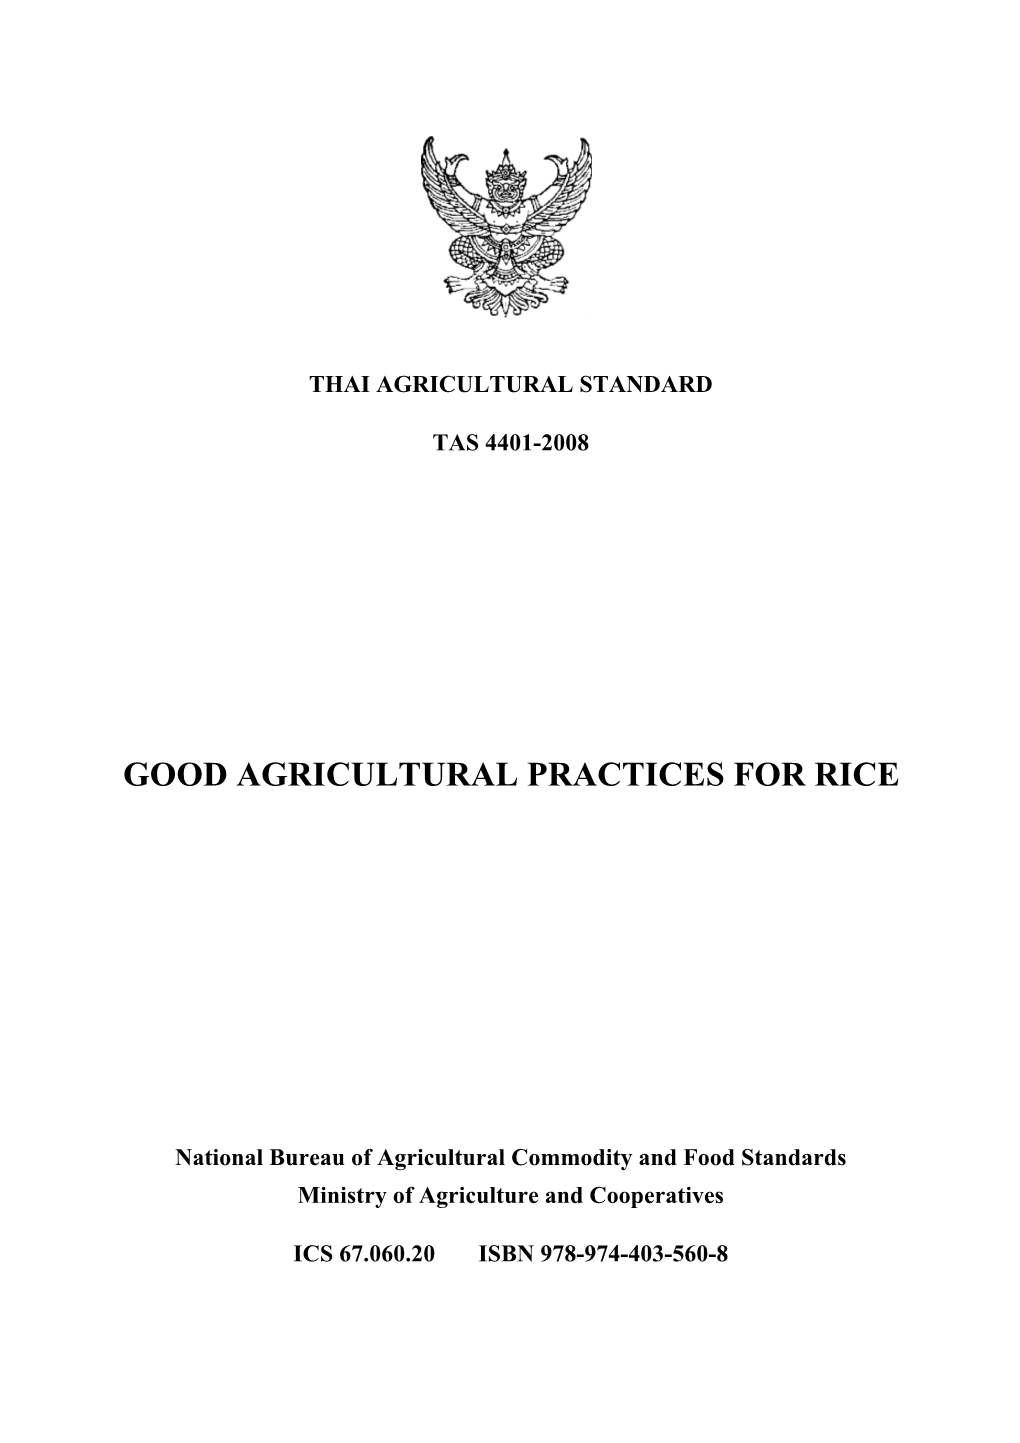 Good Agricultural Practices for Rice